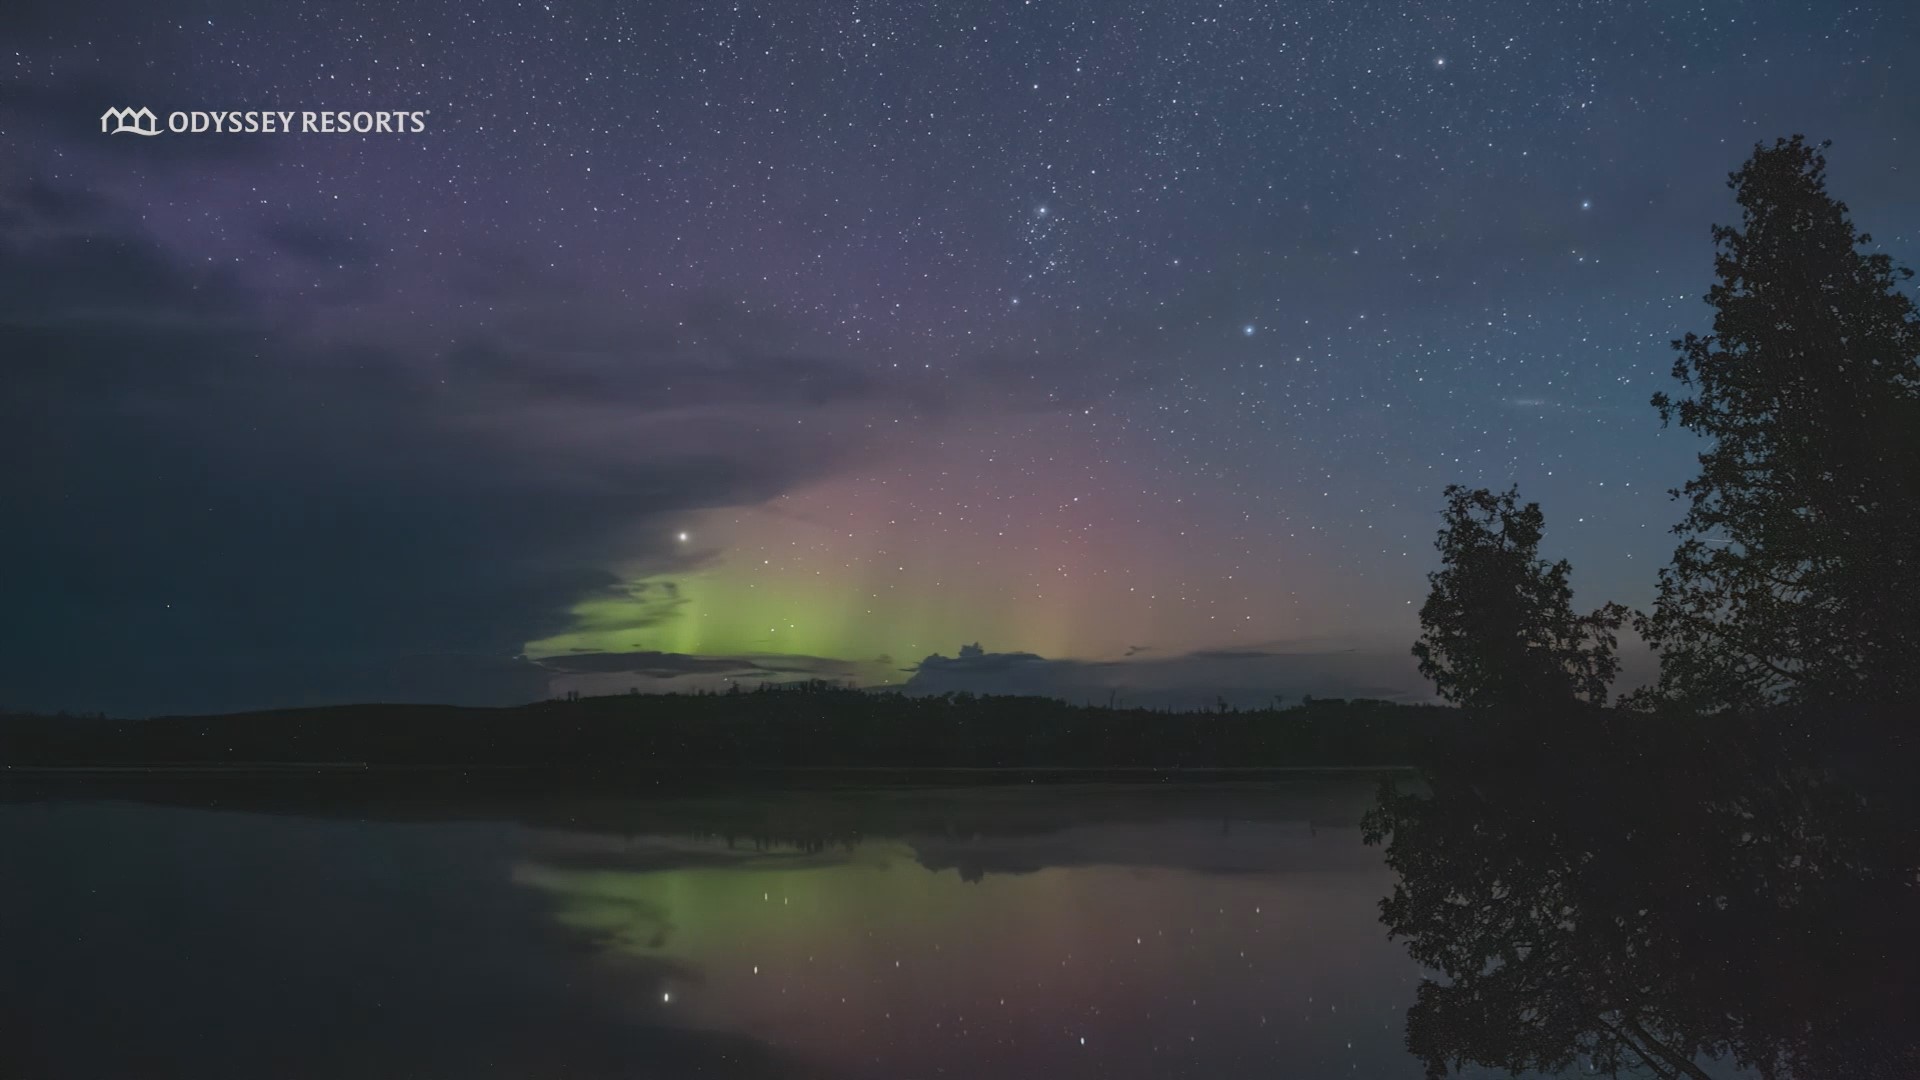 Odyssey Resorts captured video of the Aurora Borealis as storm clouds and lightning passed over Lake Superior.